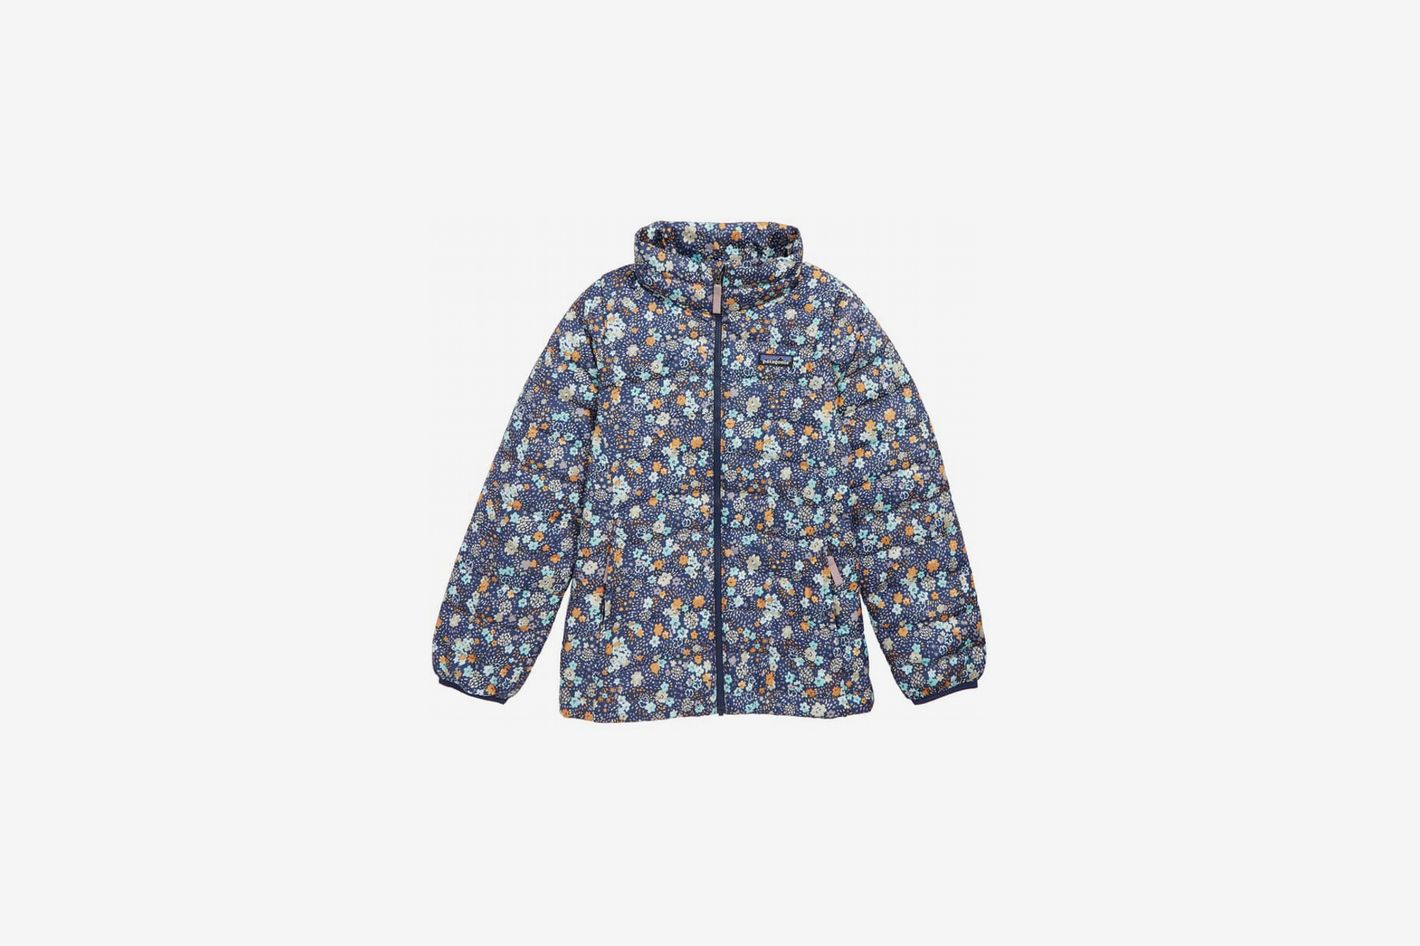 16 Patagonia Kids’ Jackets on Sale at Nordstrom: 2019 | The Strategist